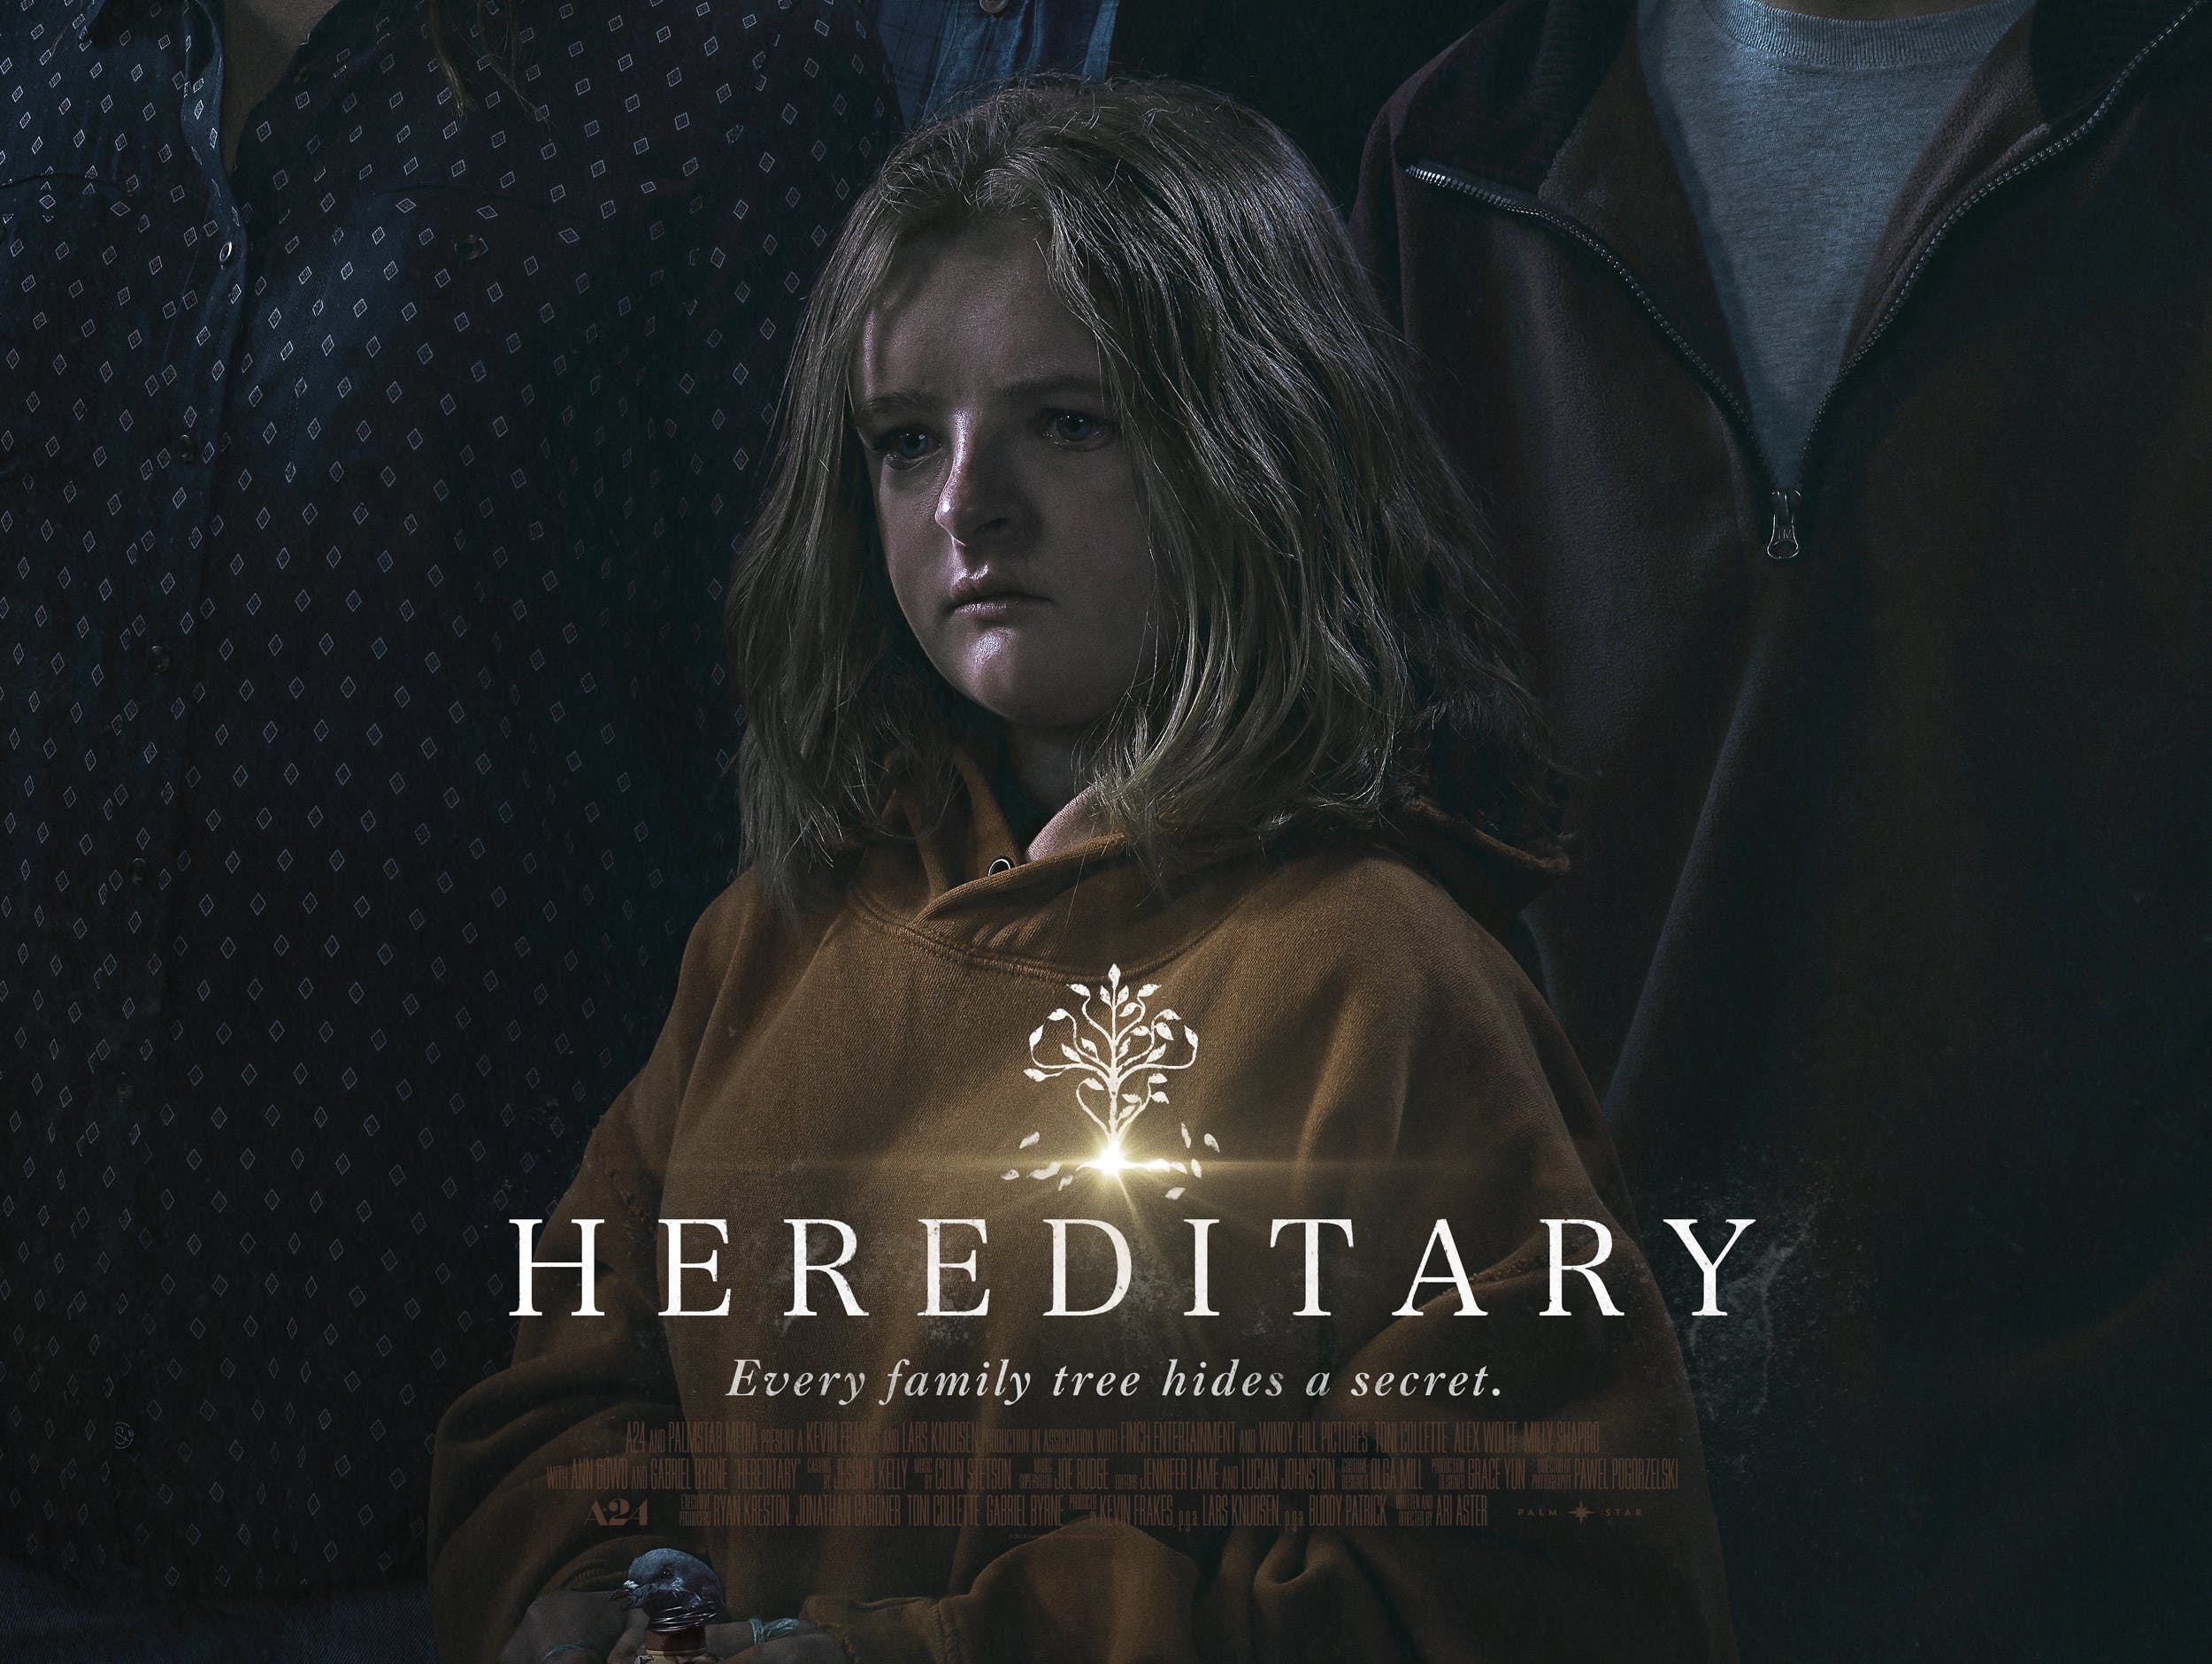 hereditary-is-set-to-release-friday-june-8th.jpeg